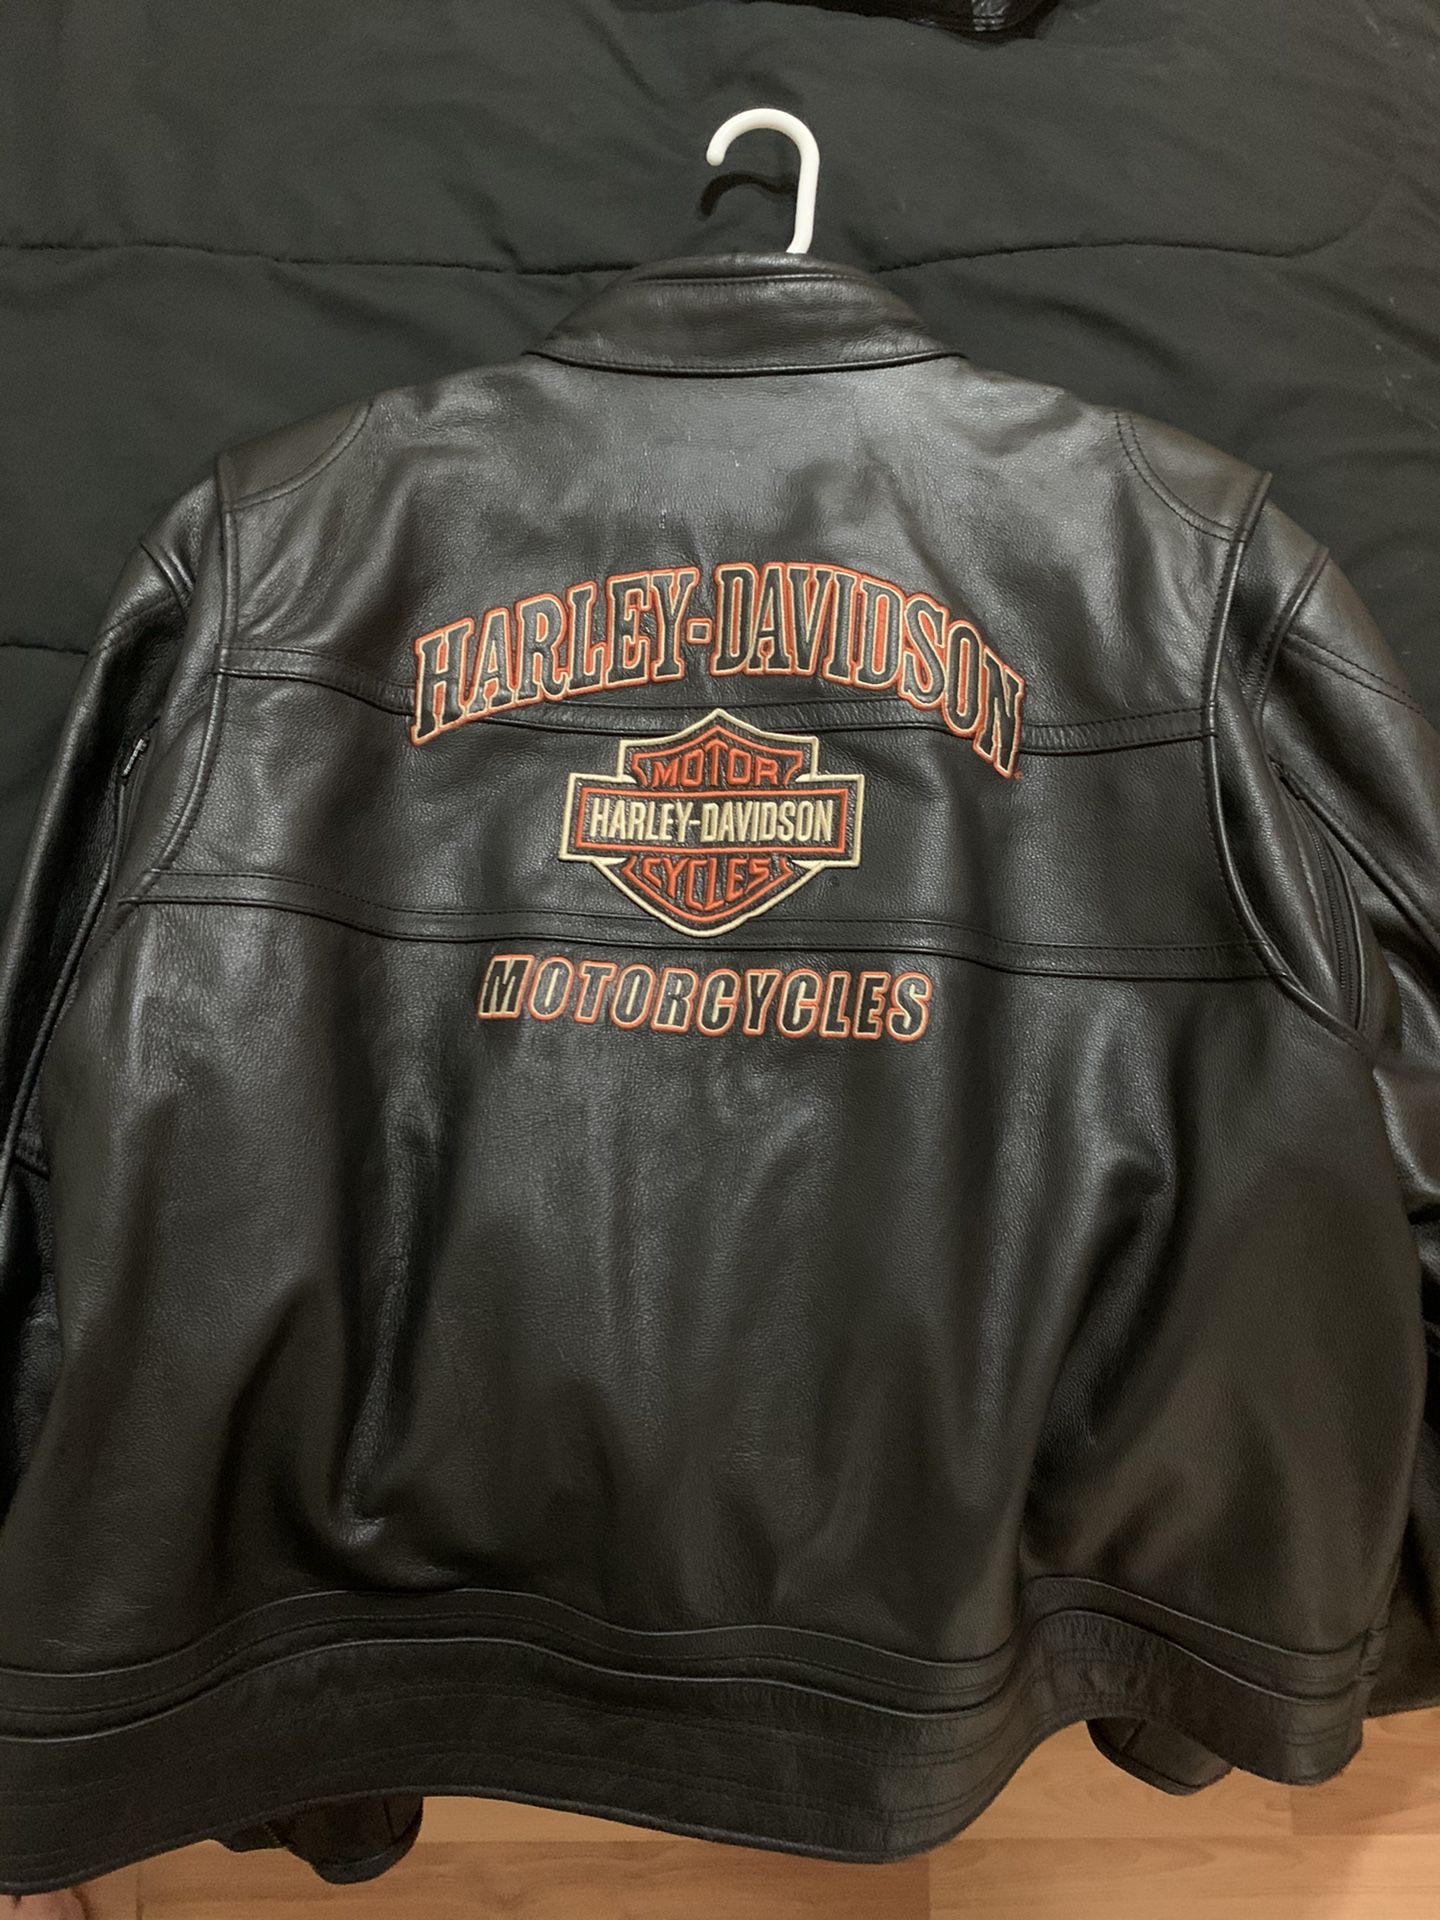 Beautiful Harley Davison black leather jacket great for winter has only been worn a few times